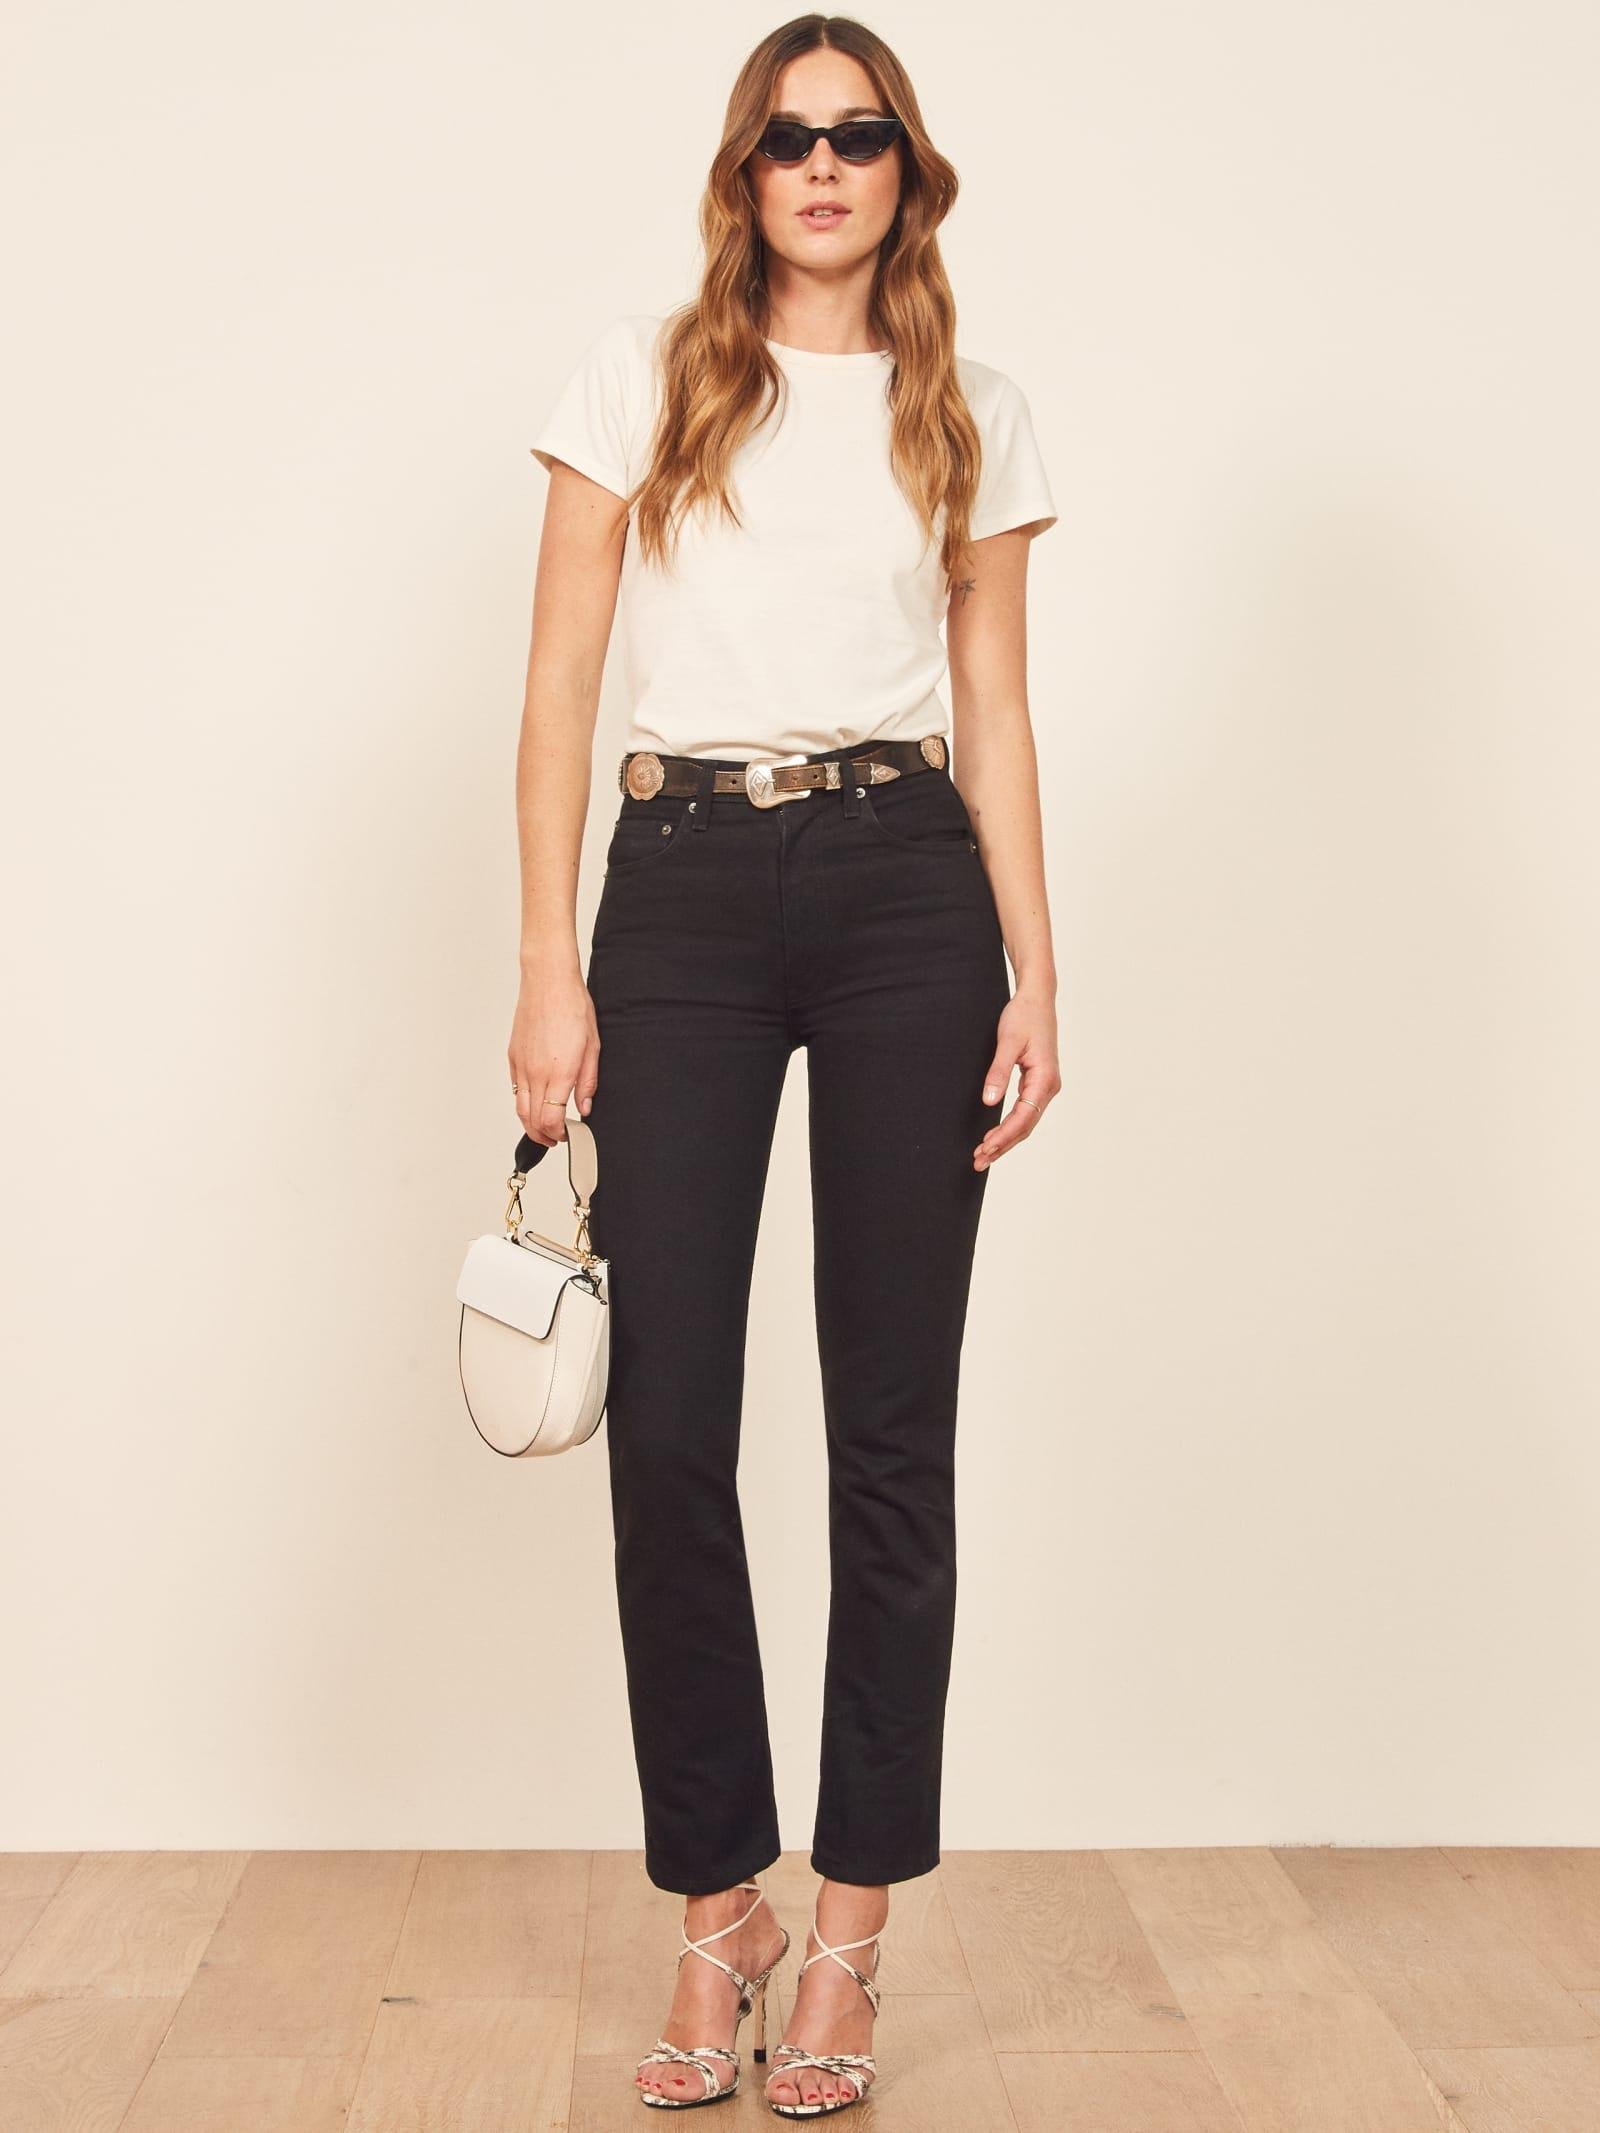 Reformation Stevie Ultra High Rise Jean in Black